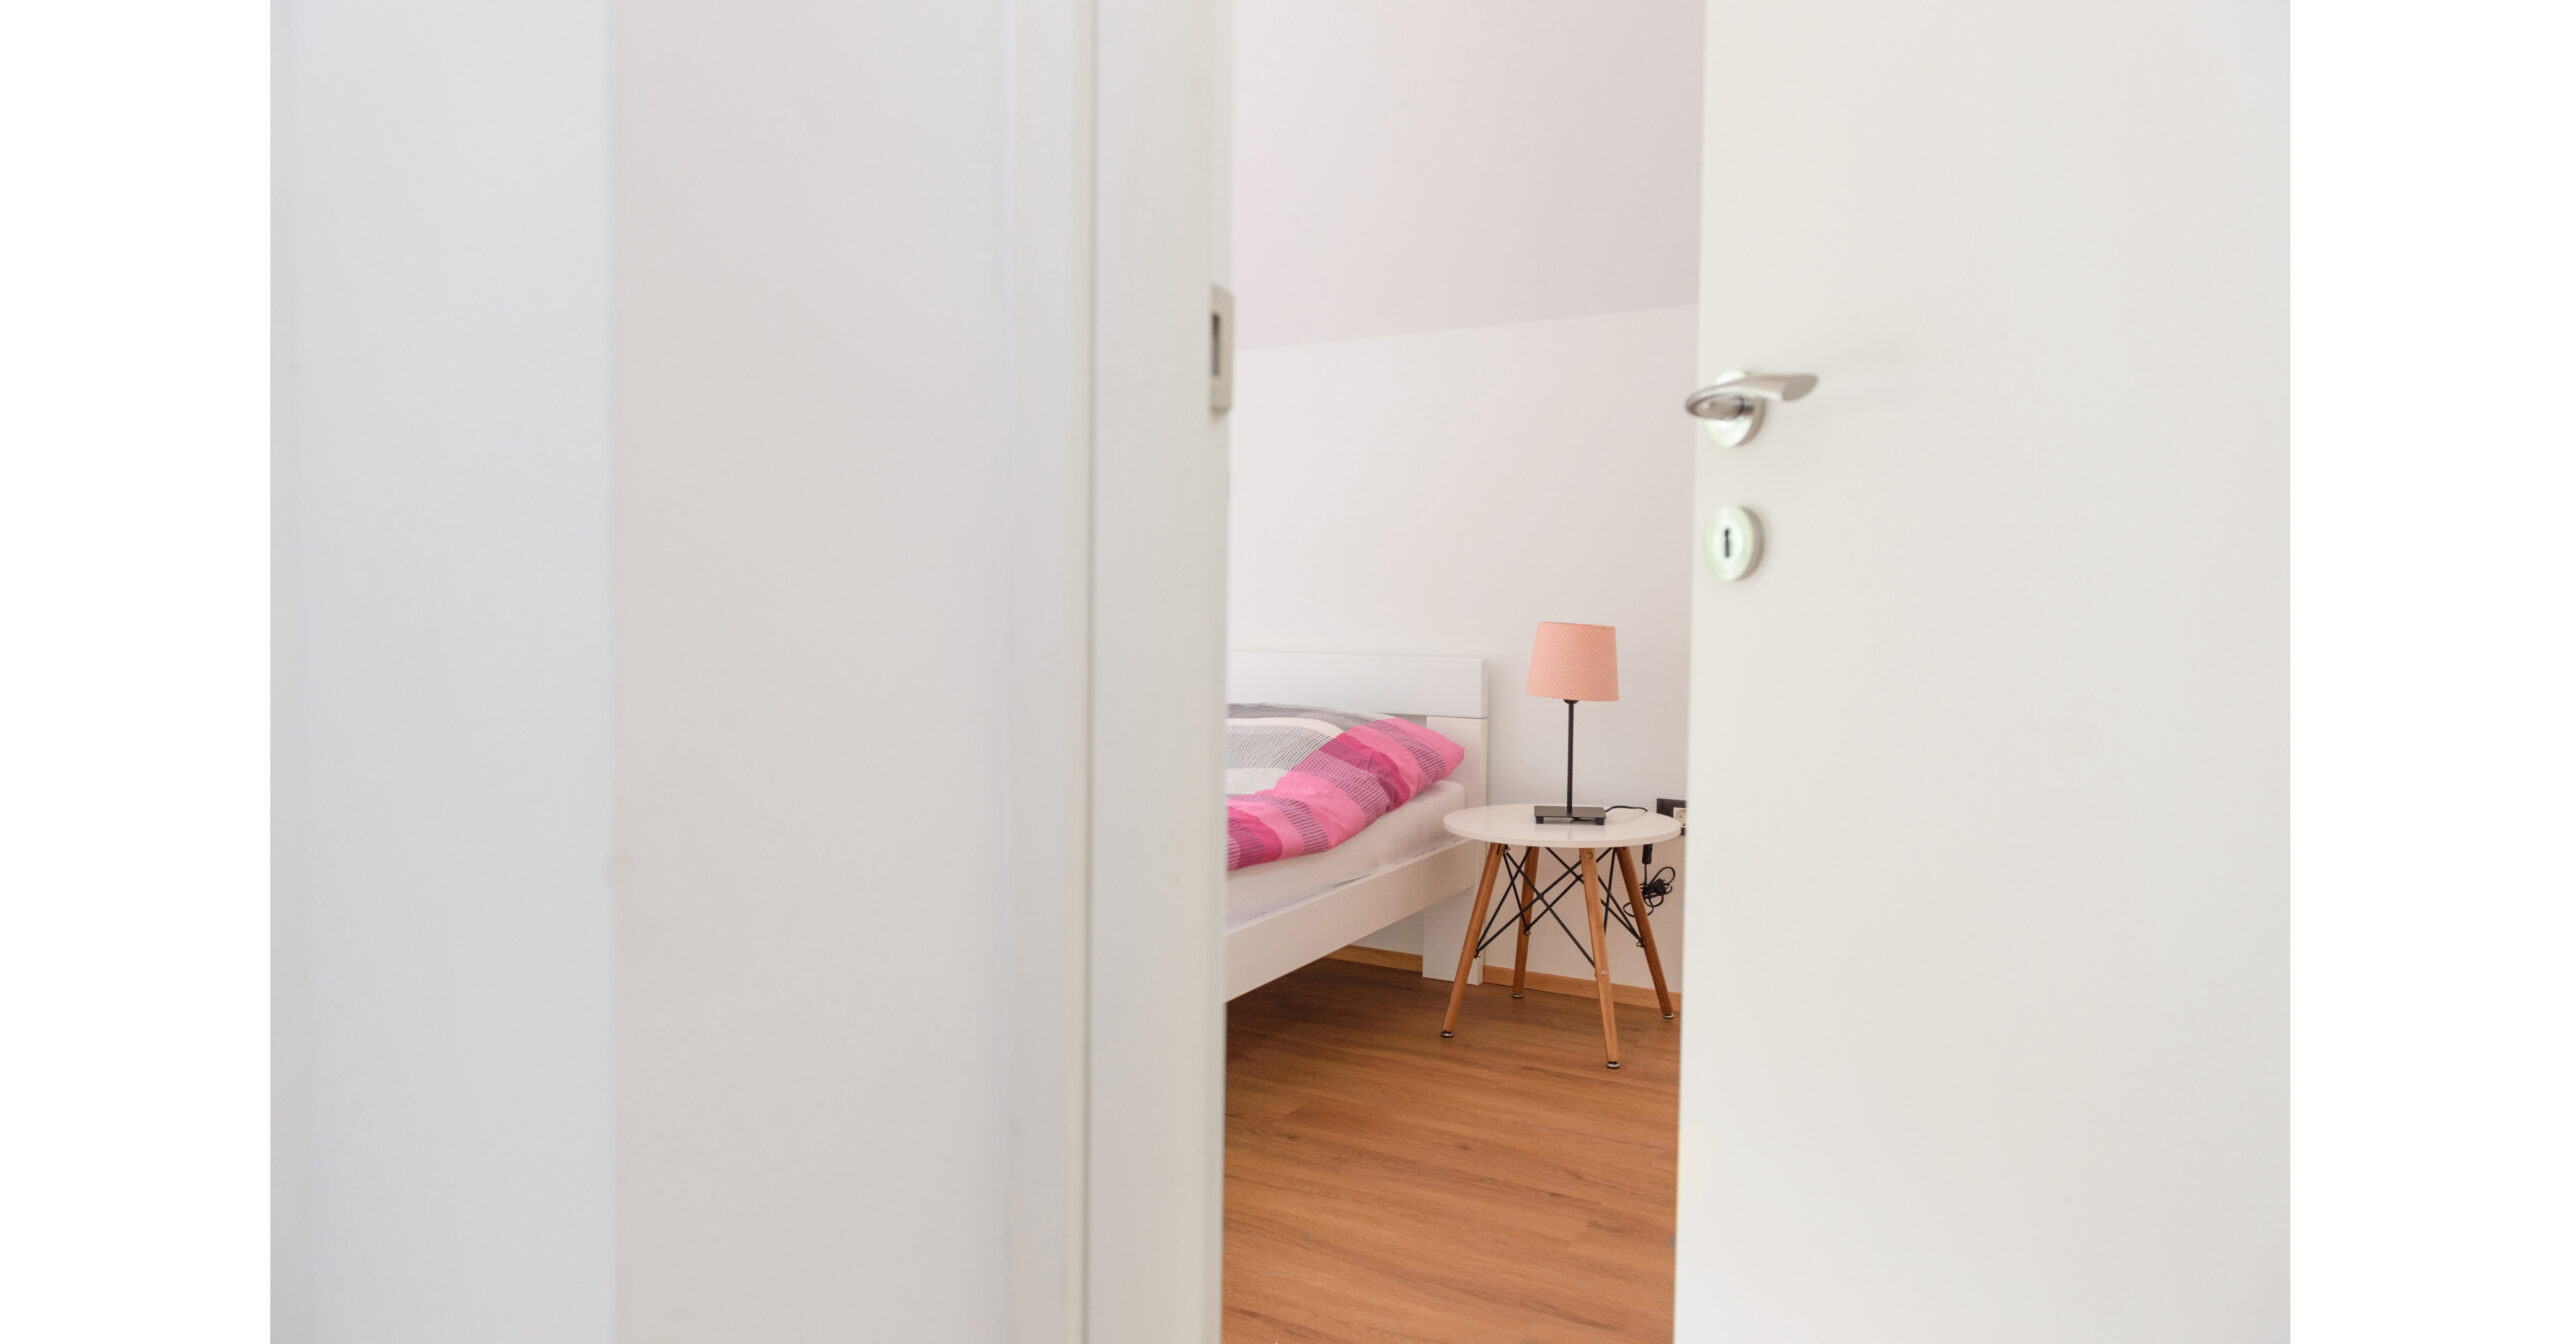 Door to a bedroom partly open with the edge of a bed in view. A light pink lamp on the table